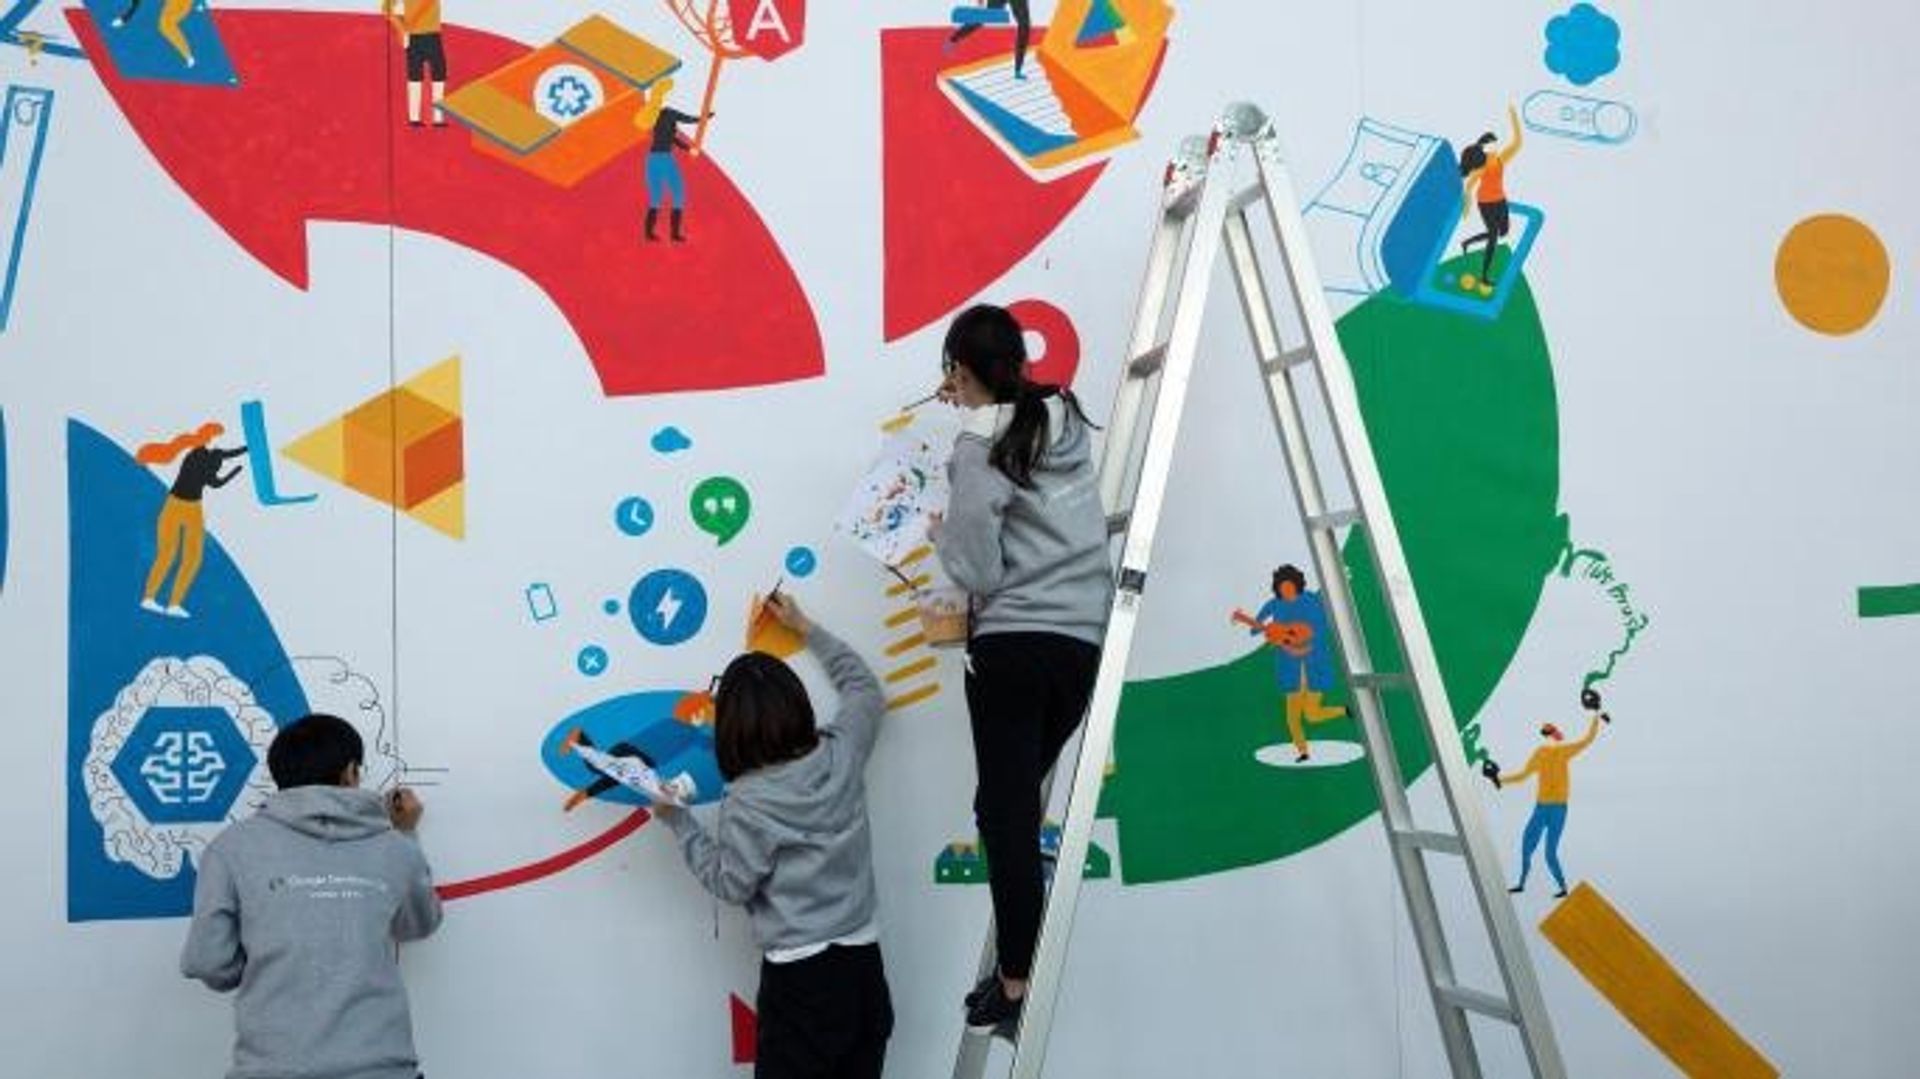 An image of people painting a mural